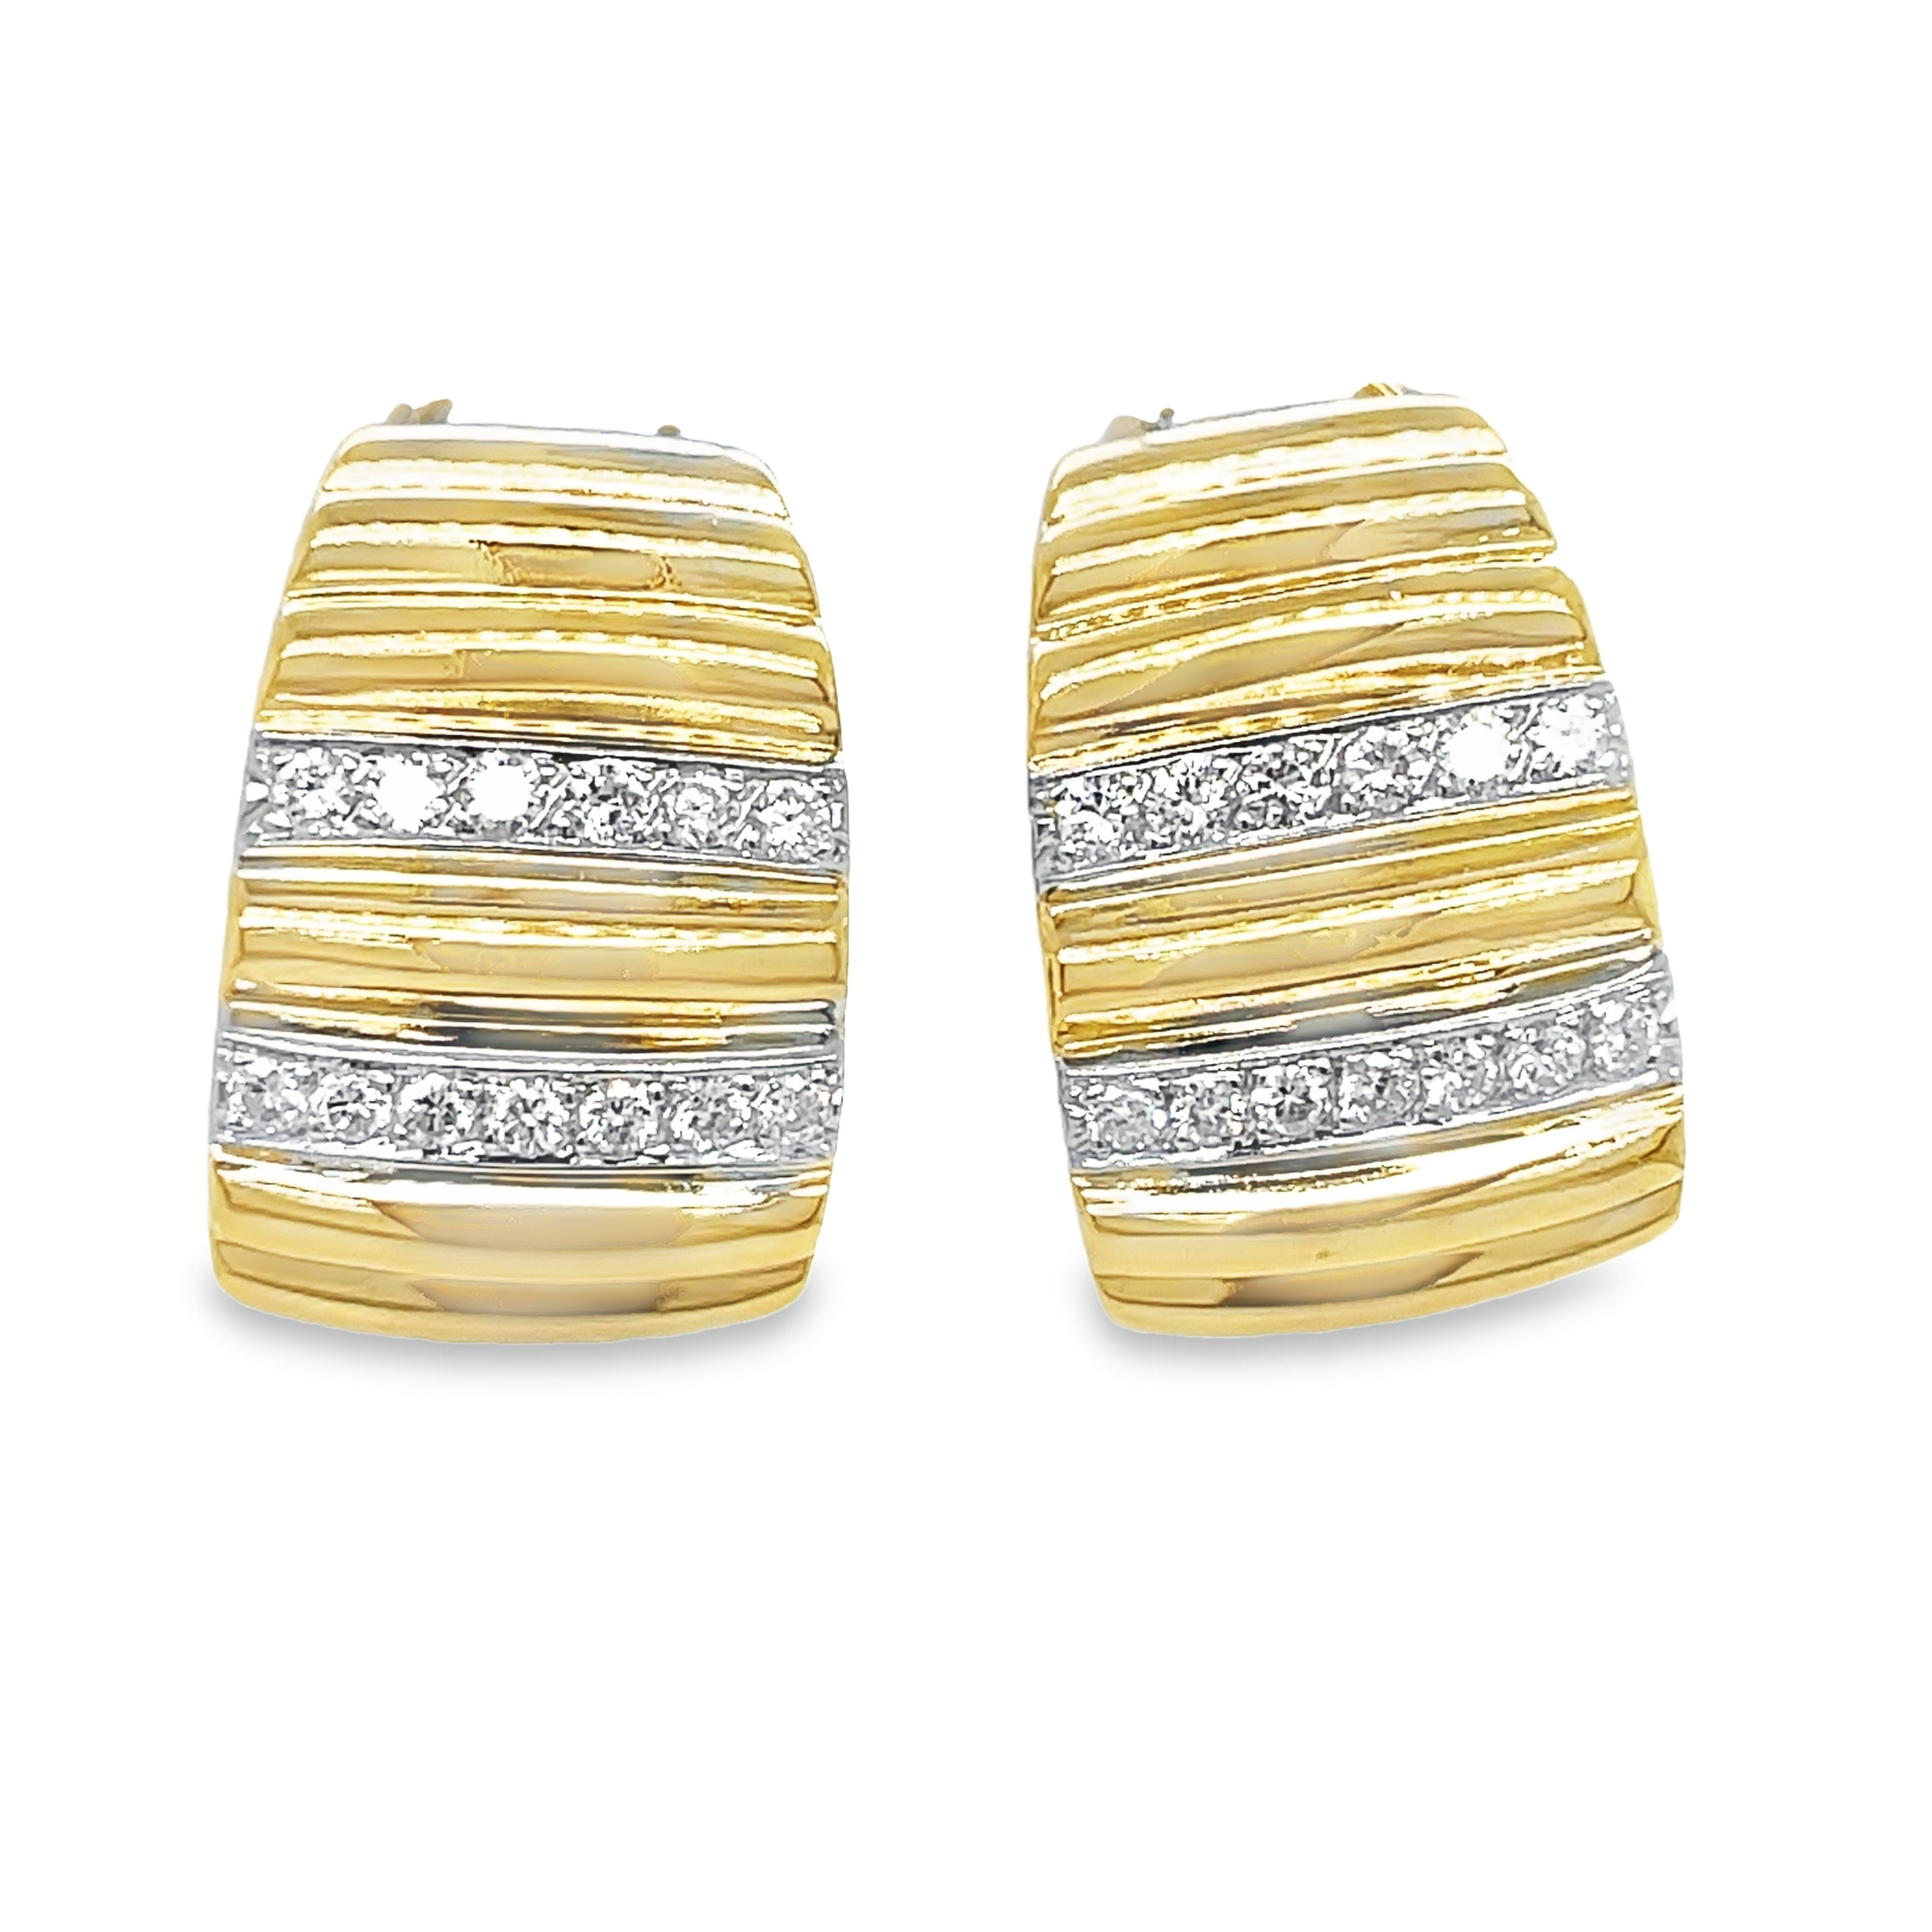 Looking for the perfect finishing touch to your outfit? Look no further! These 18k yellow gold earrings feature sparkling round diamonds and an omega clip for easy wear. With a classic style, these earrings are sure to add a touch of elegance to any look.